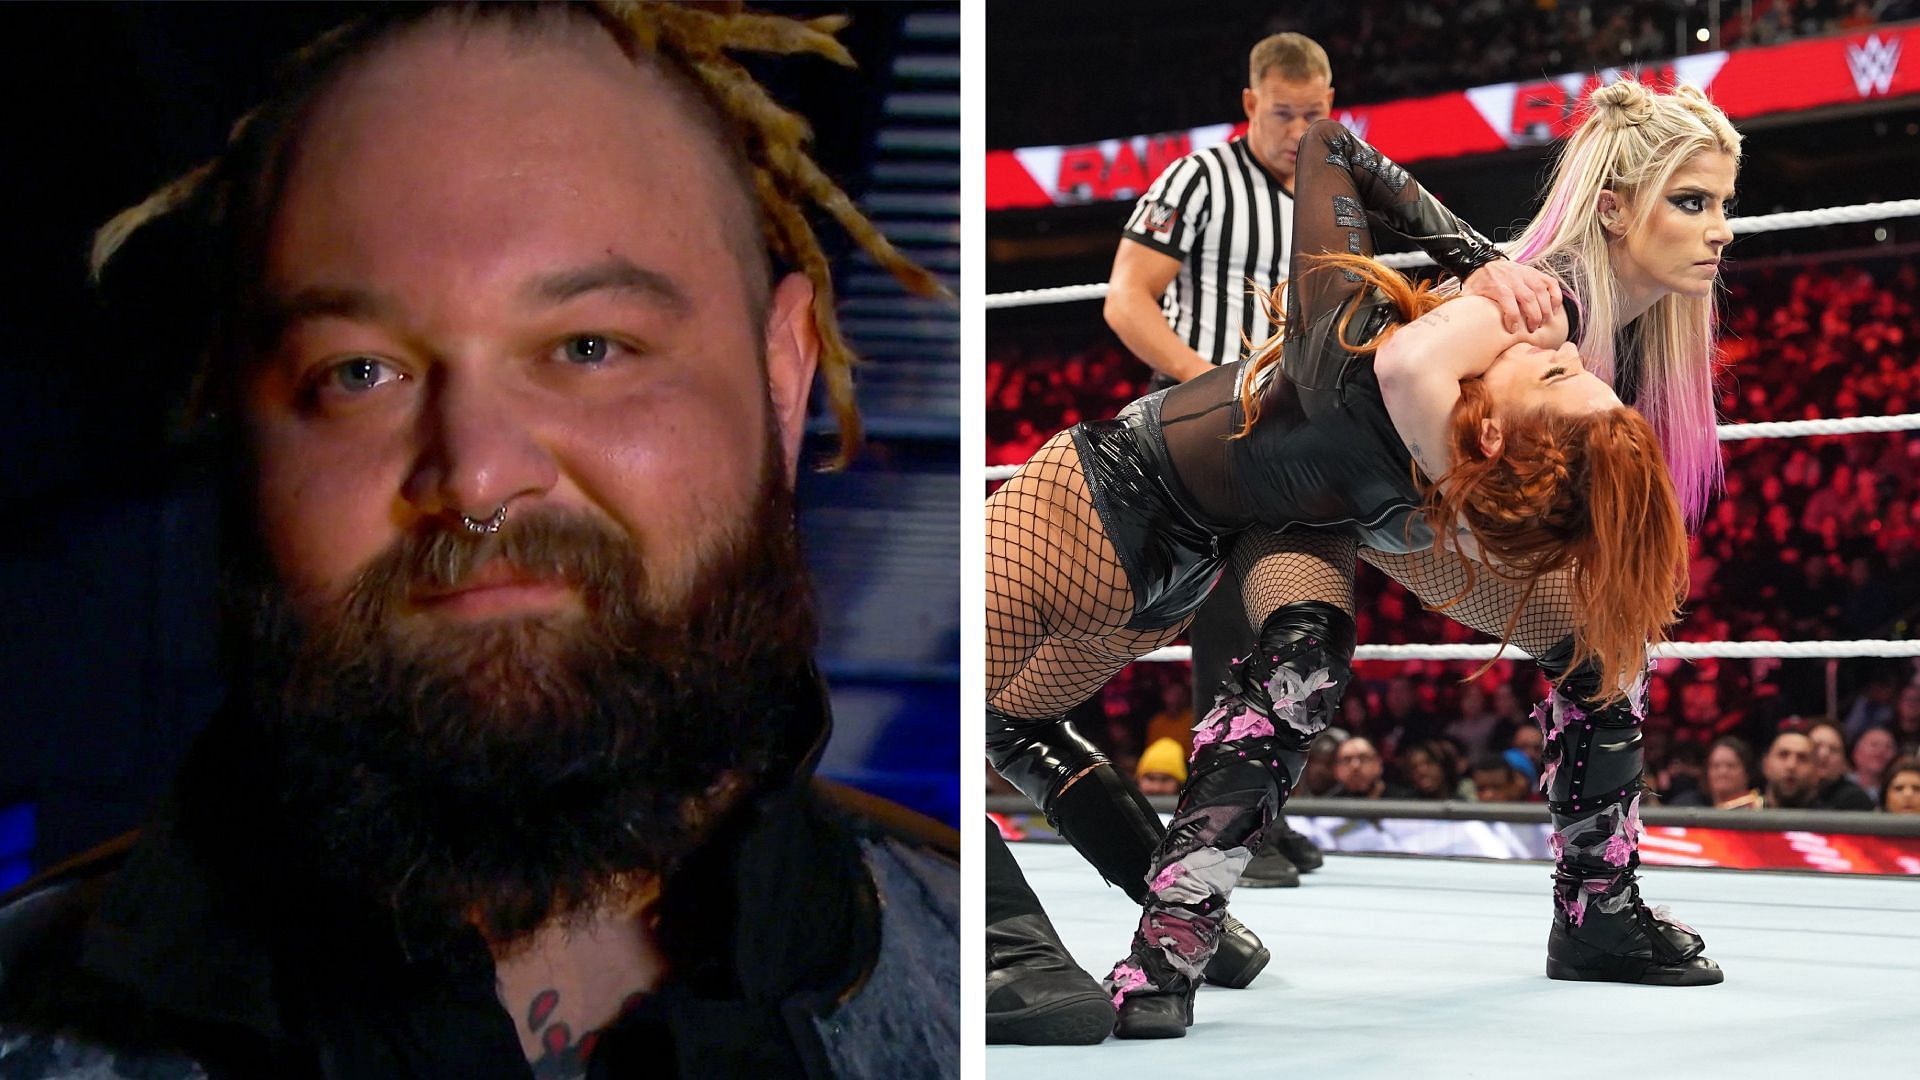 Bray Wyatt returned to WWE towards the end of 2022